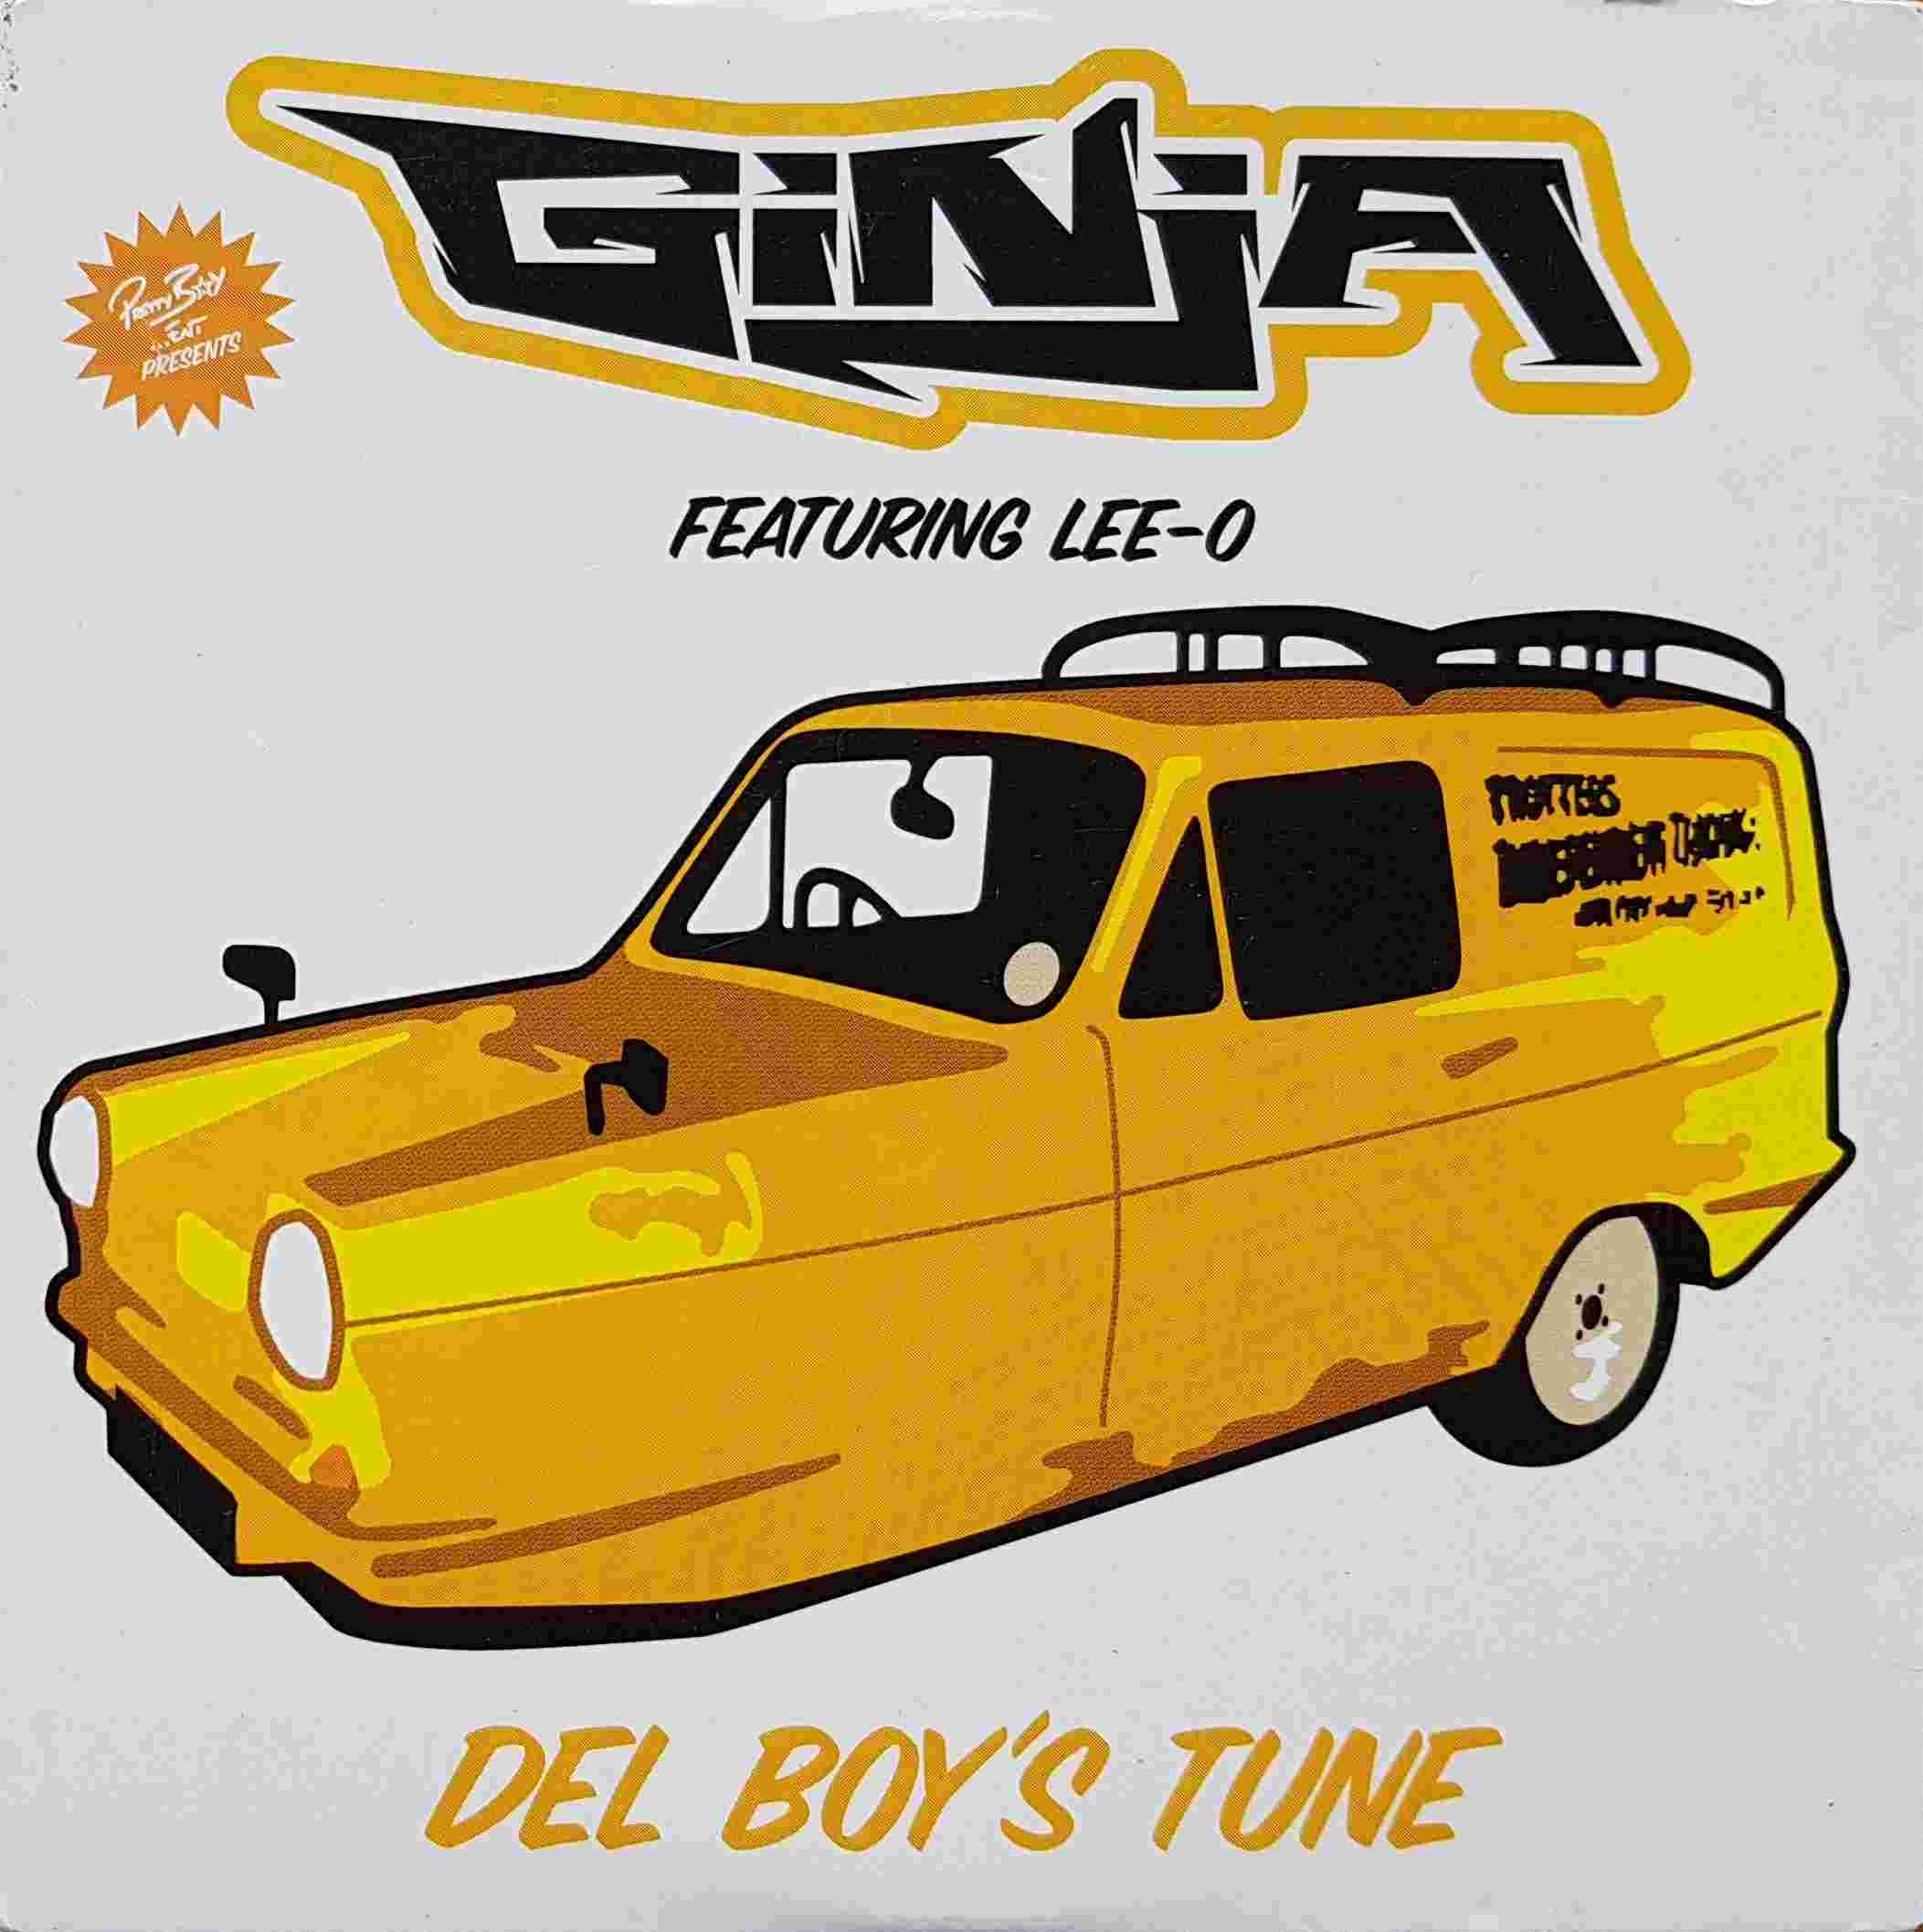 Picture of Del Boy's tune by artist Ginja featuring Lee-O from the BBC cdsingles - Records and Tapes library